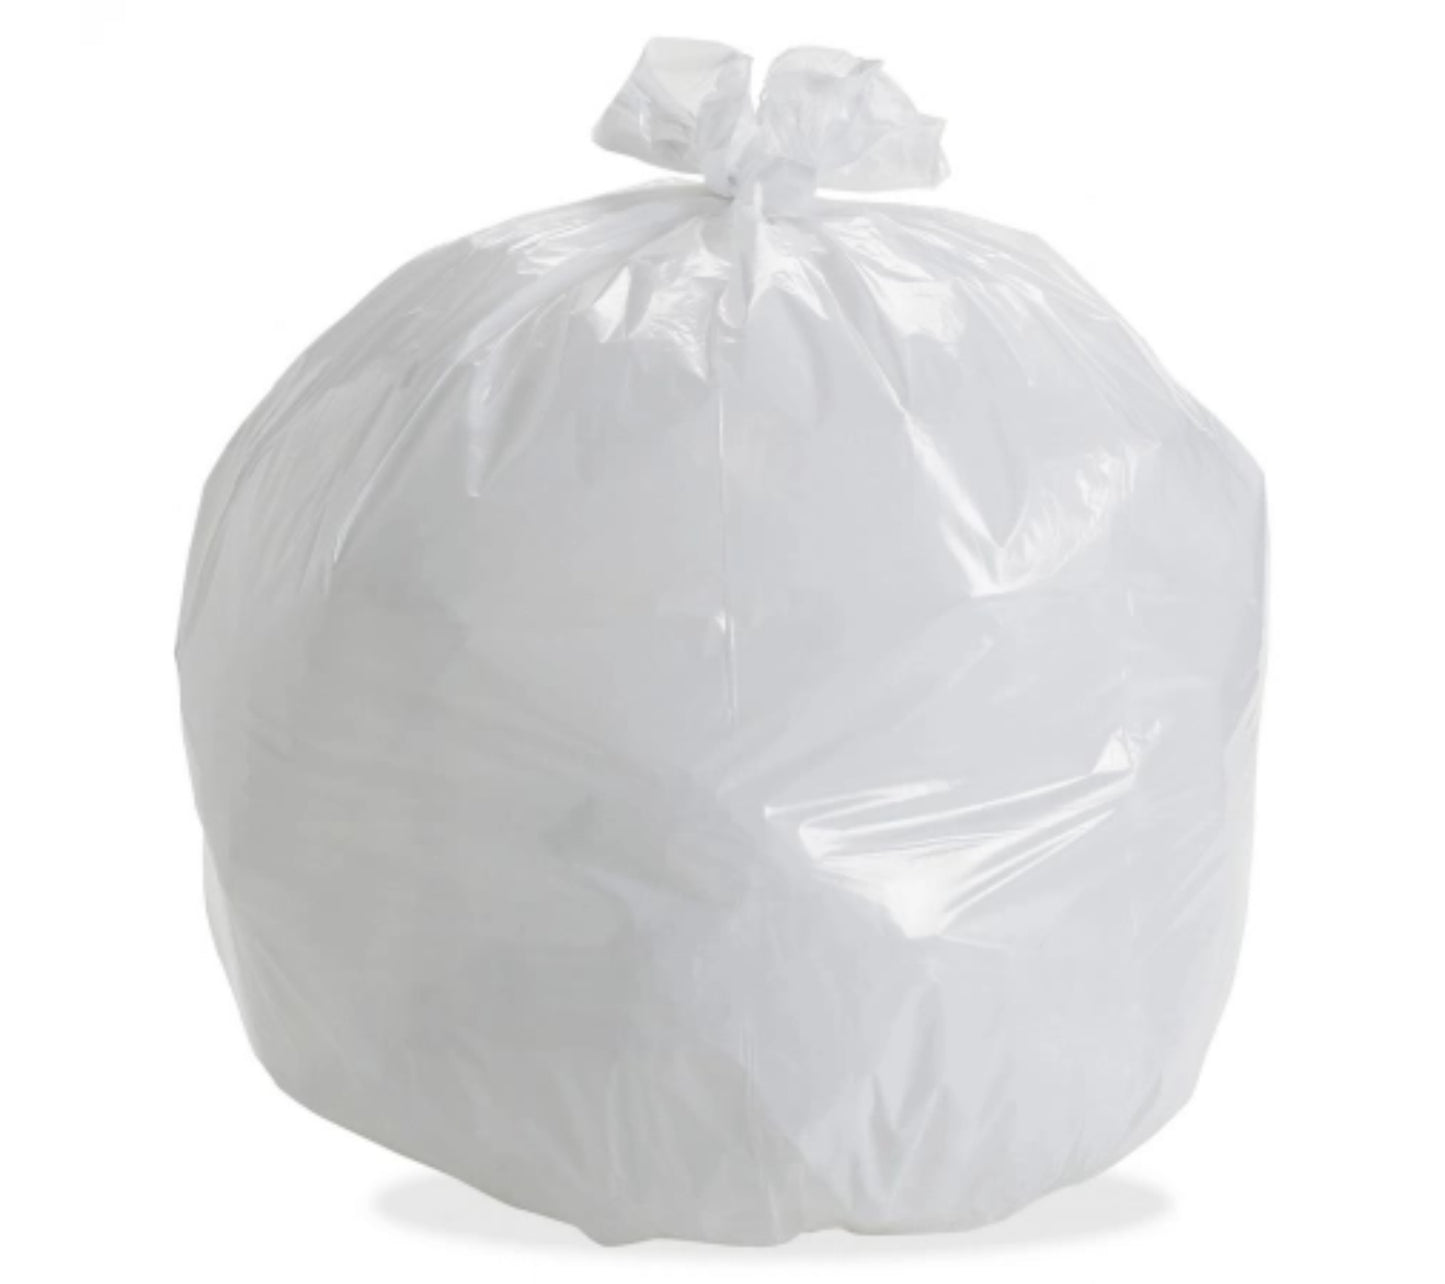 JanWise 17x18 Clear Garbage Bag Liners, .6 Mic, 2-5 Gal, 2,000 Case —  Janitorial Superstore